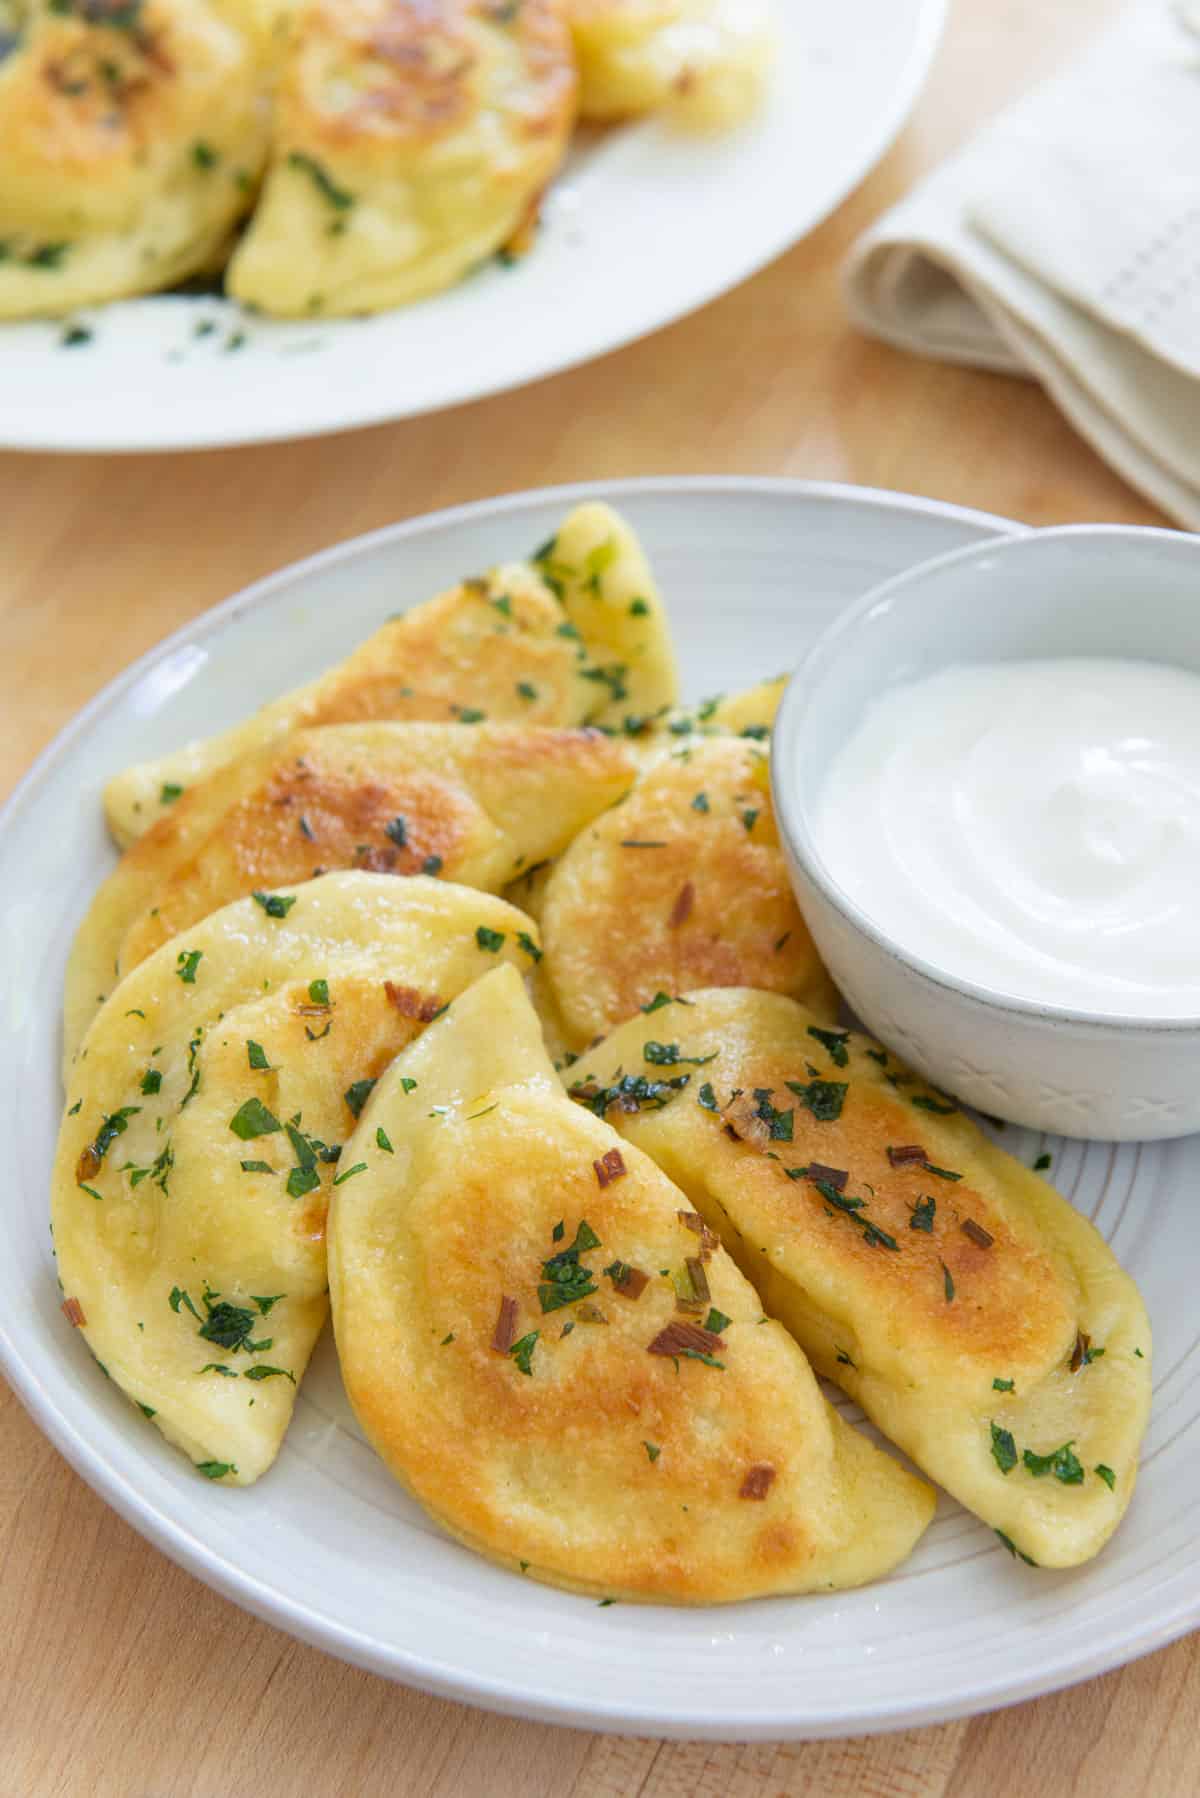 Homemade Pierogies On a White Plate with Sour Cream